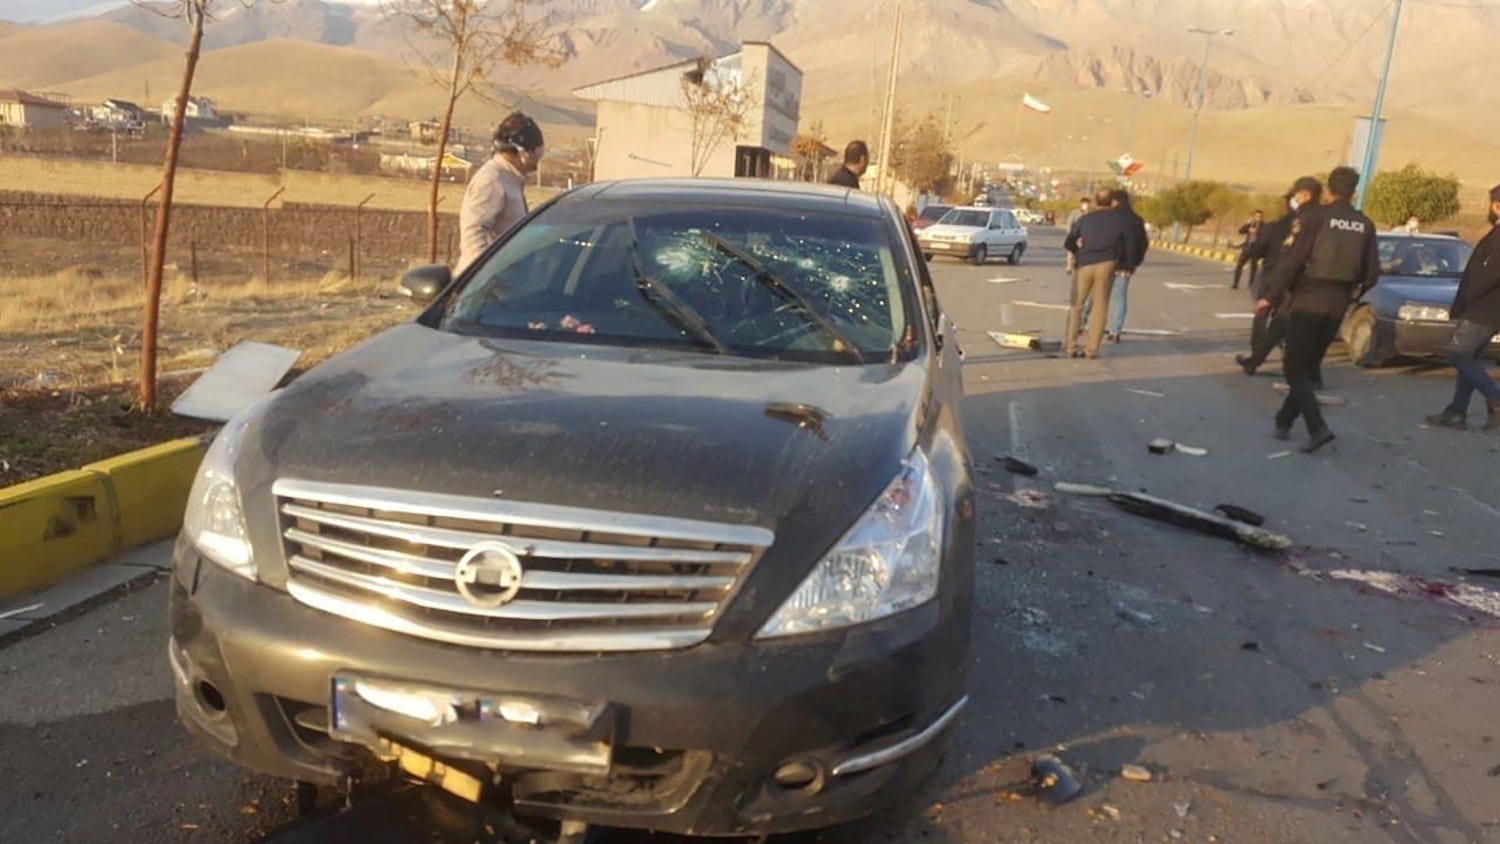 Scene of the attack that killed  Mohsen Fakhrizadeh